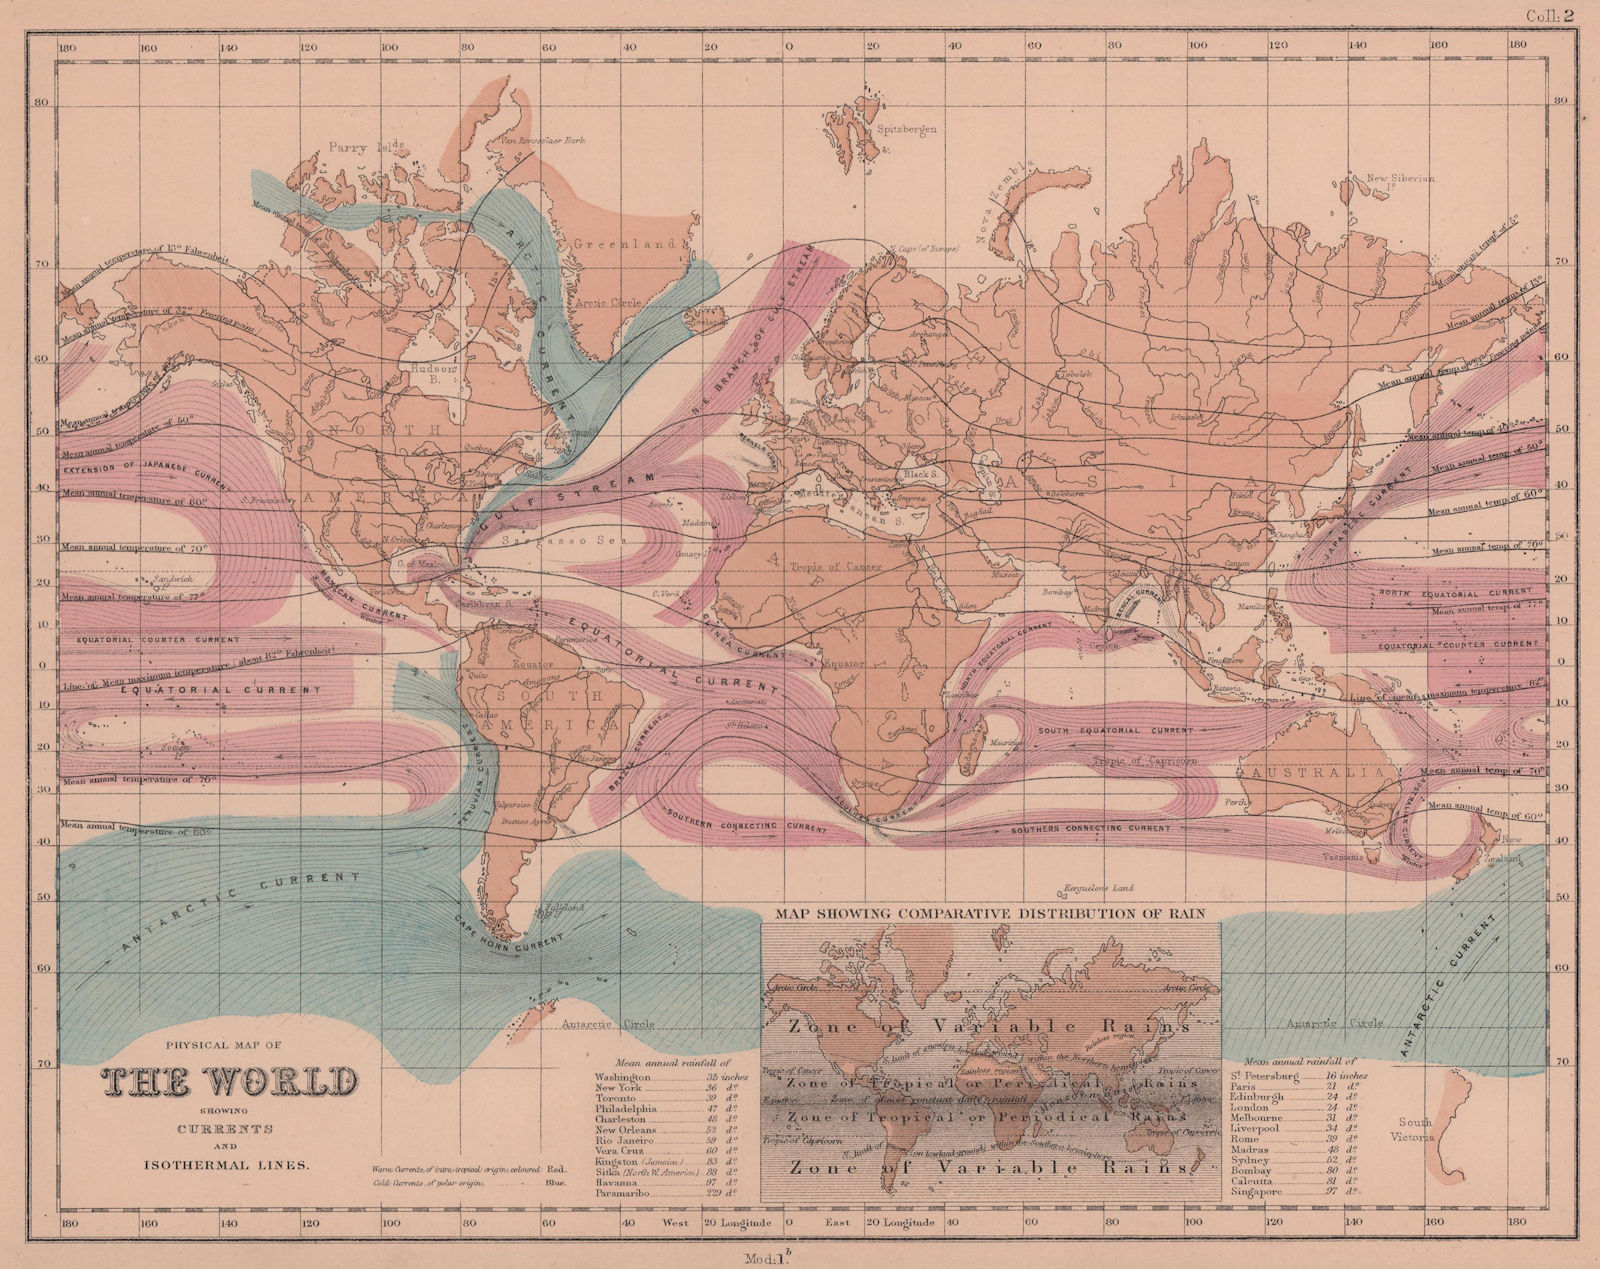 Physical Map of the World. Ocean currents & isothermal Lines. HUGHES 1876